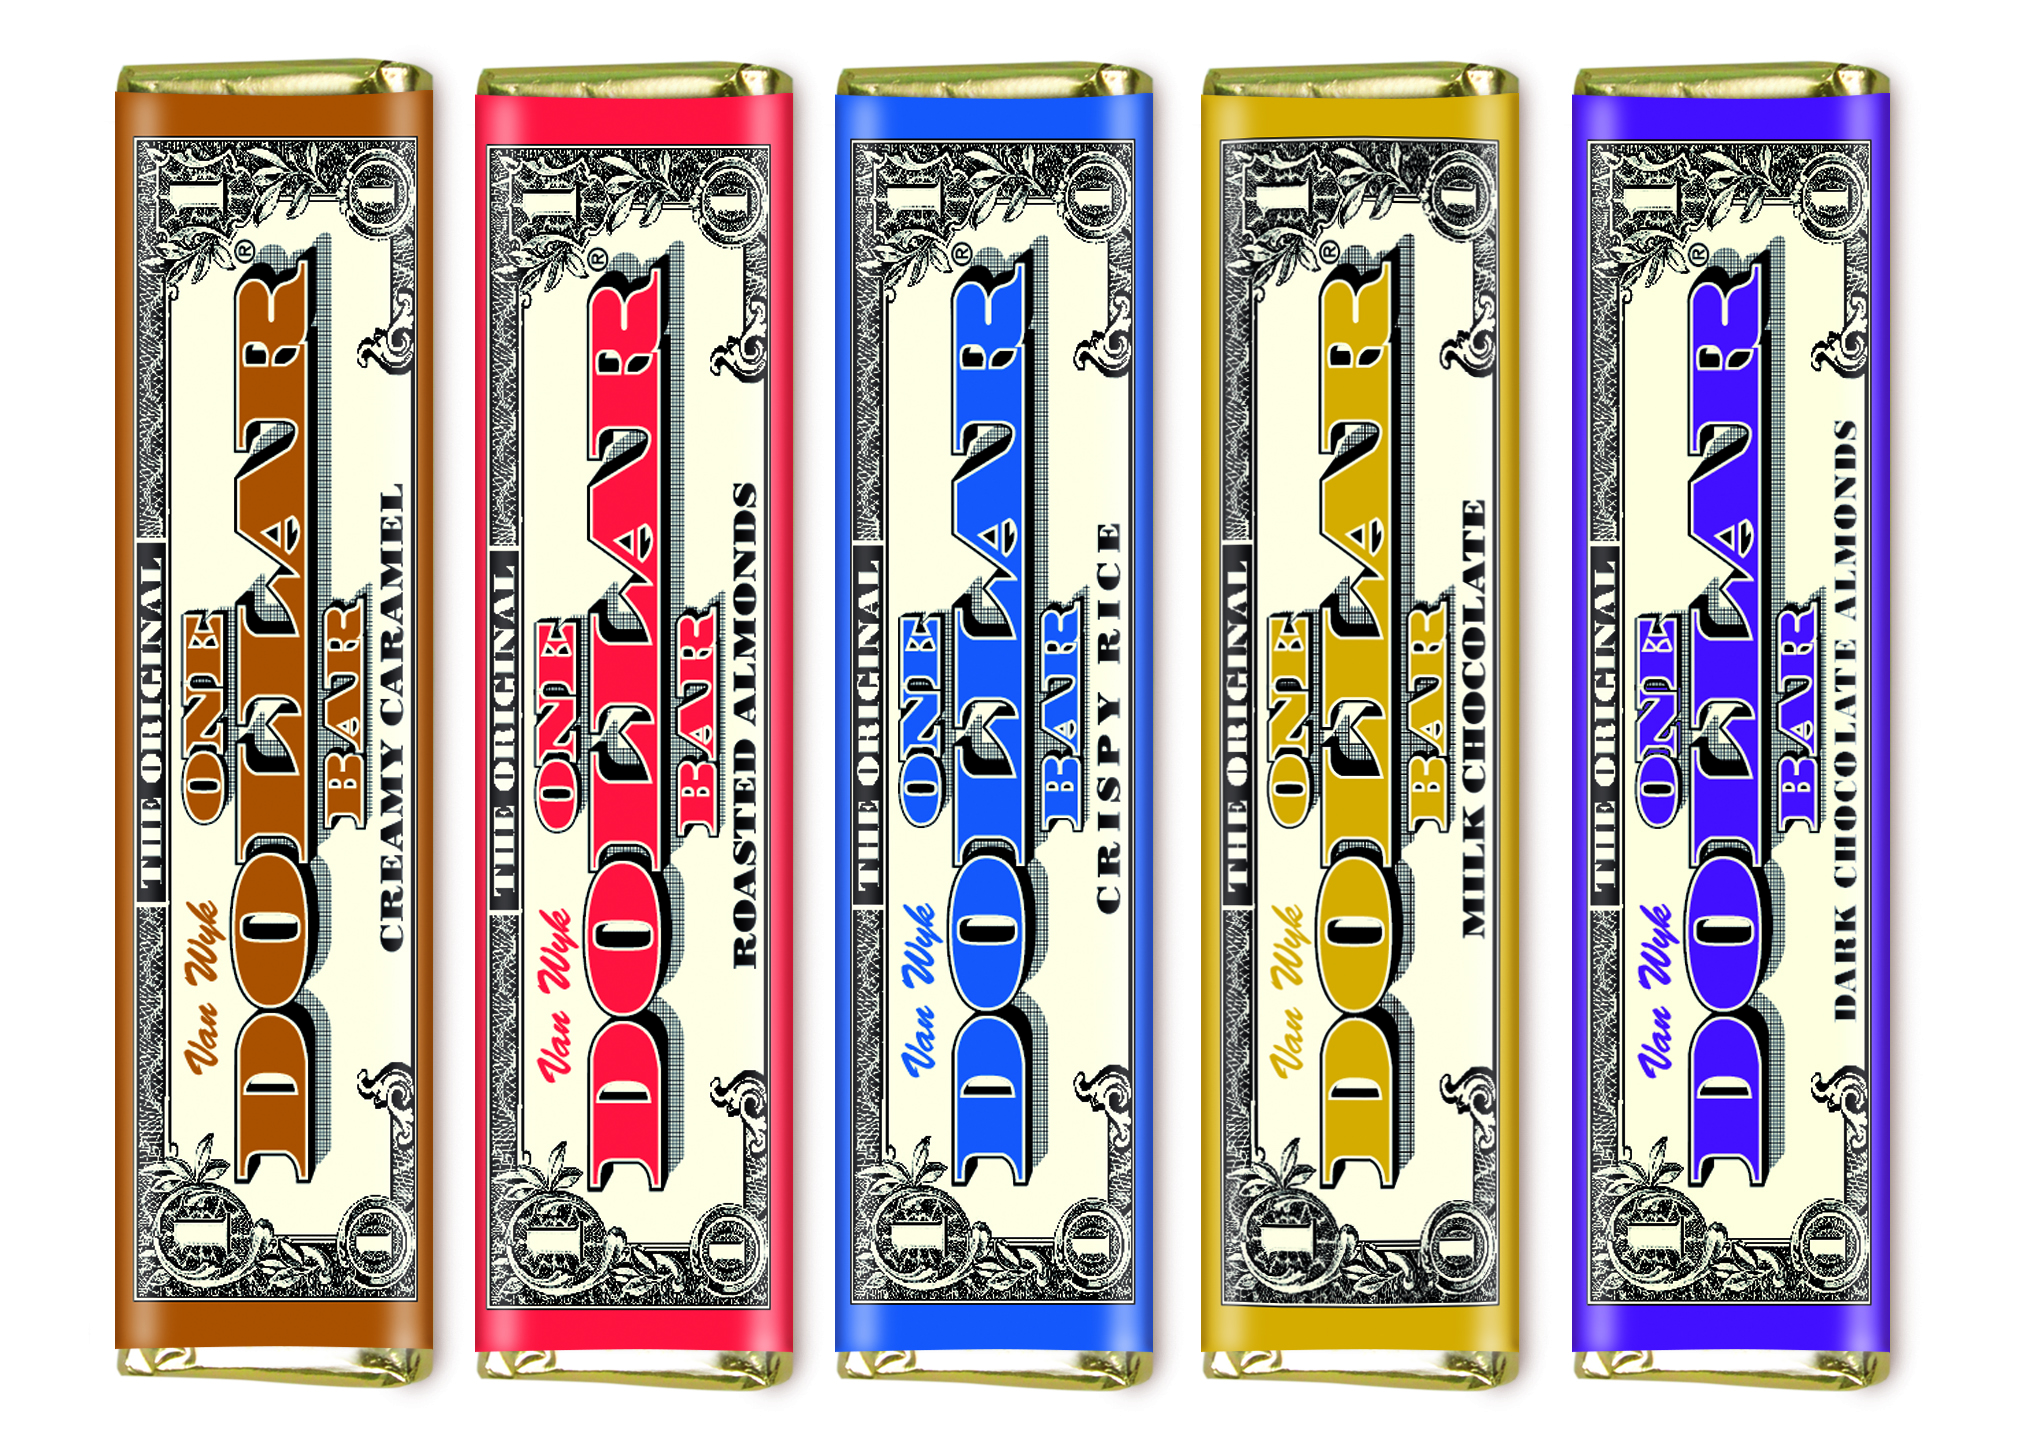 $1 Stock Bar Variety Pack - 60 count